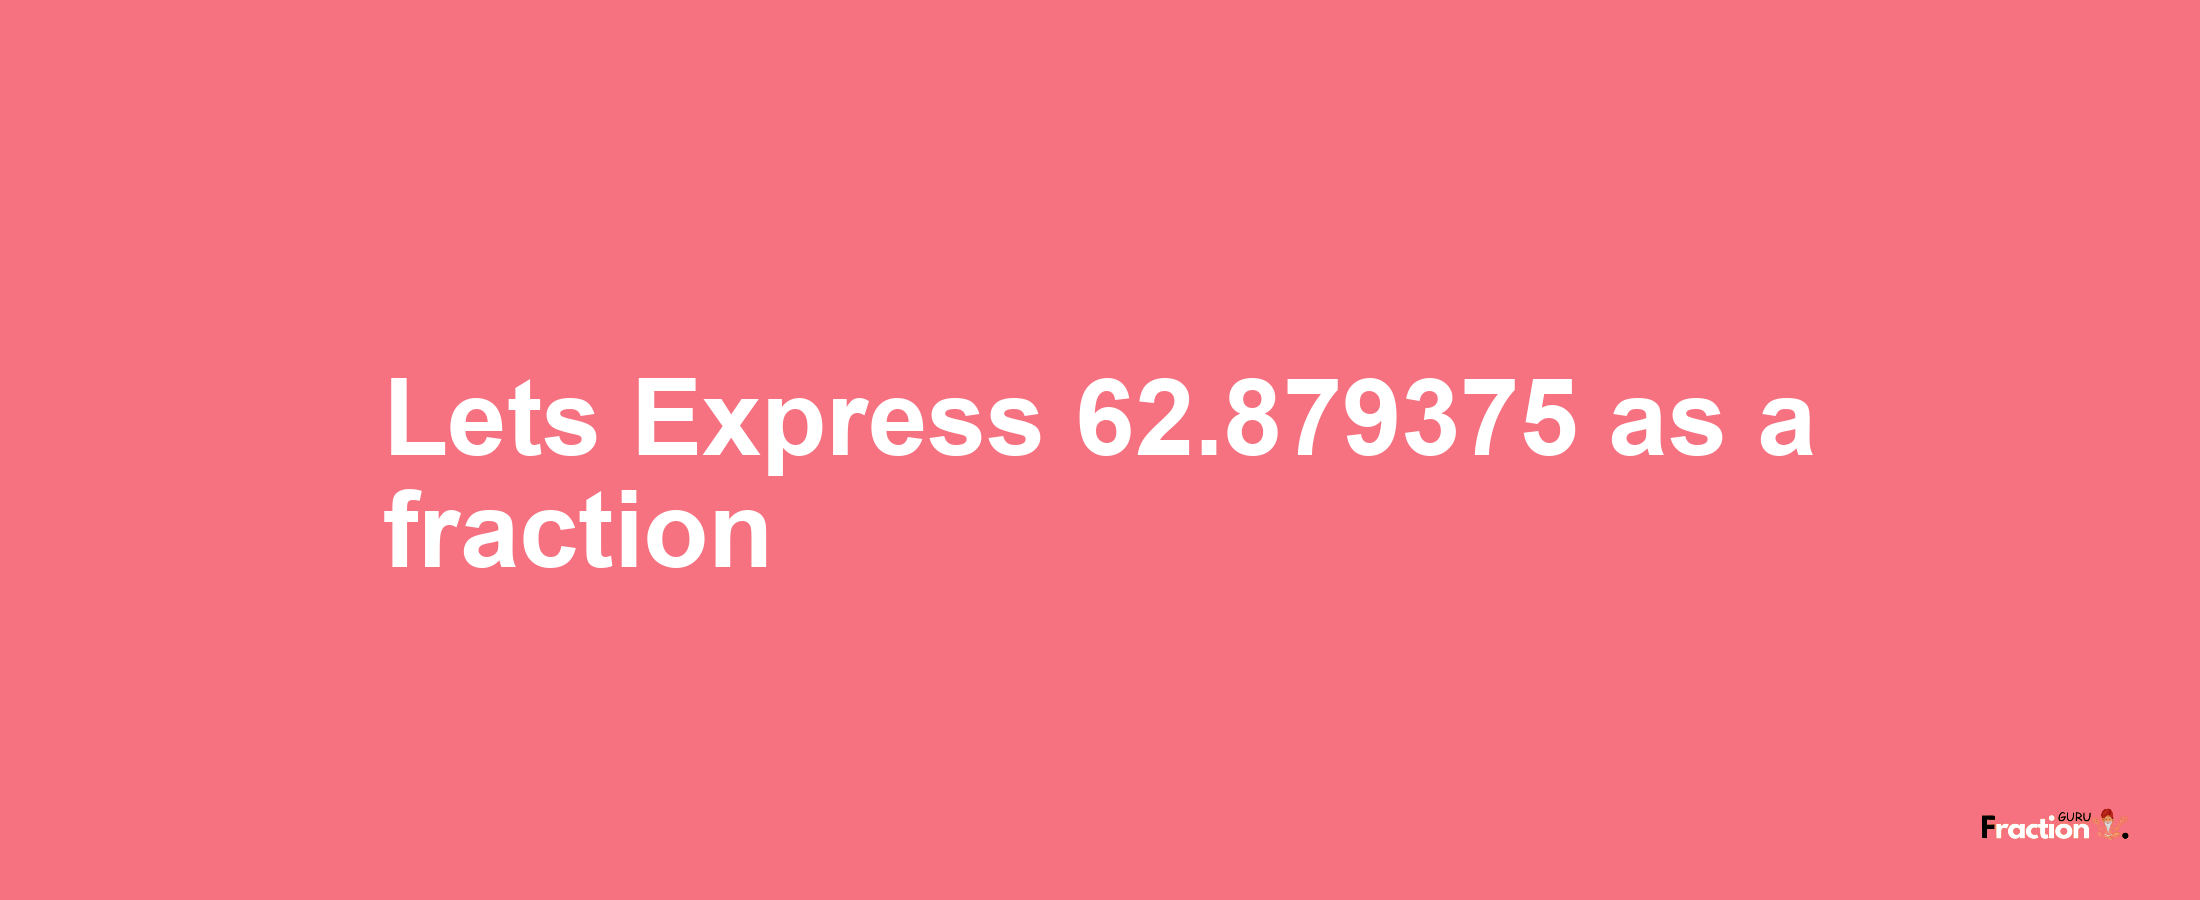 Lets Express 62.879375 as afraction